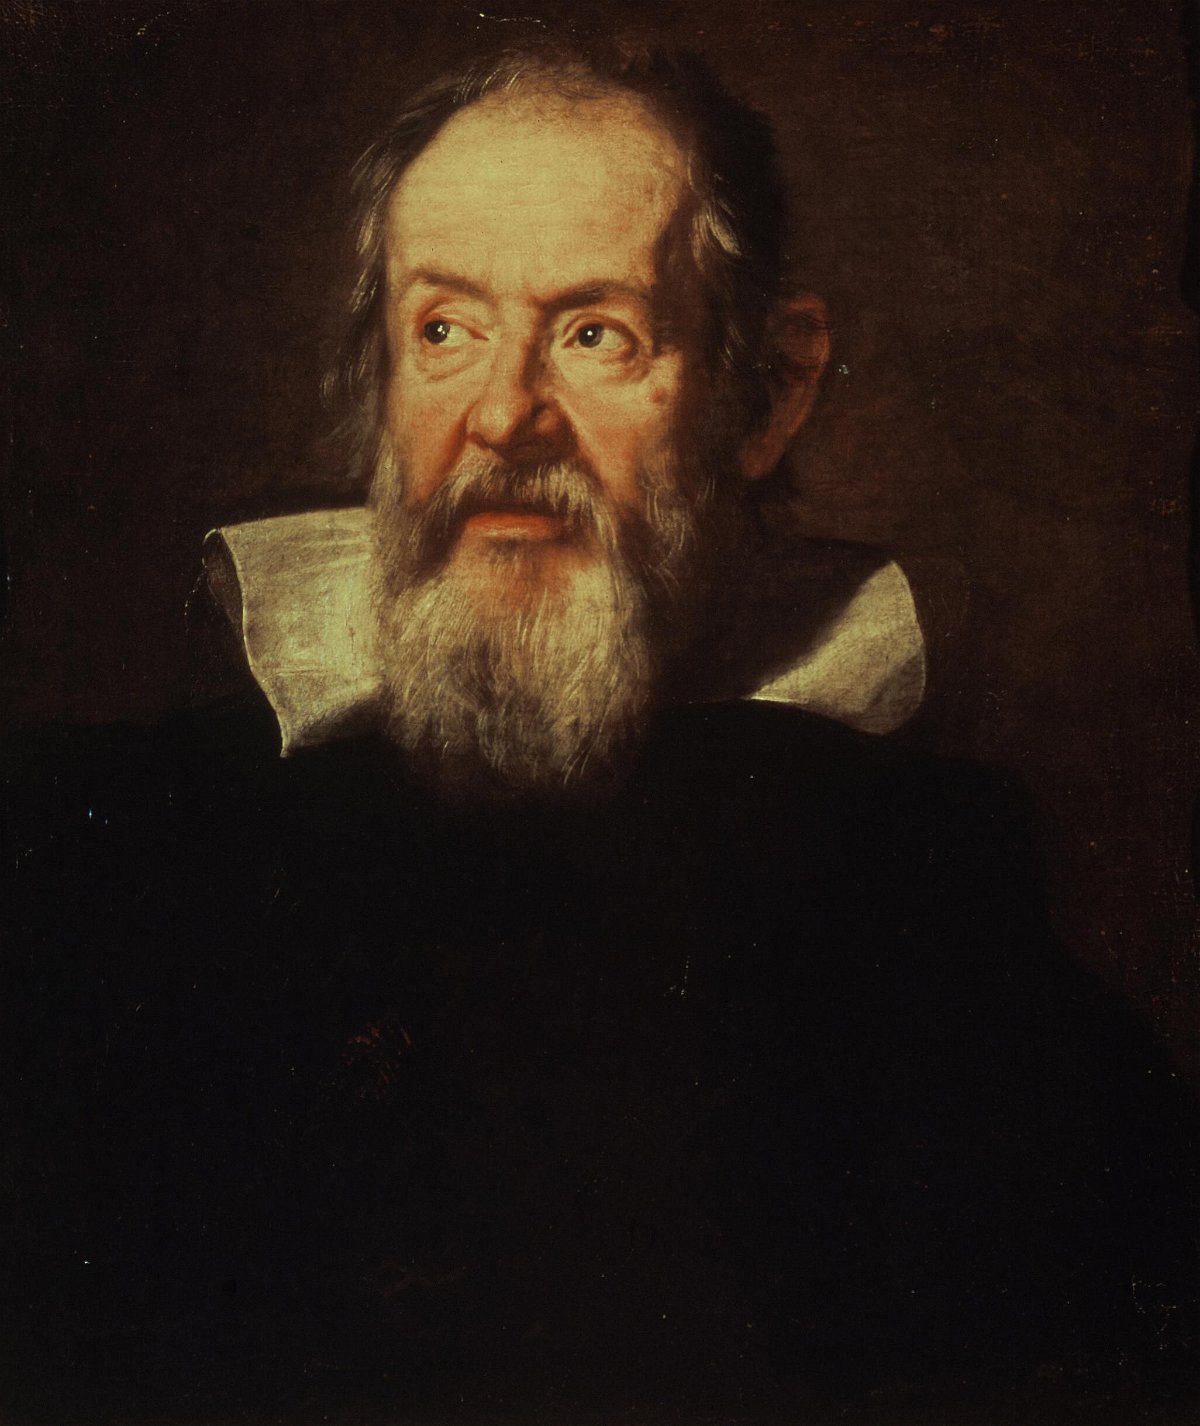 <i>Imagno/Getty Images</i><br/>A treasured manuscript at the University of Michigan library that was believed to have been written by Galileo Galilei is a forgery